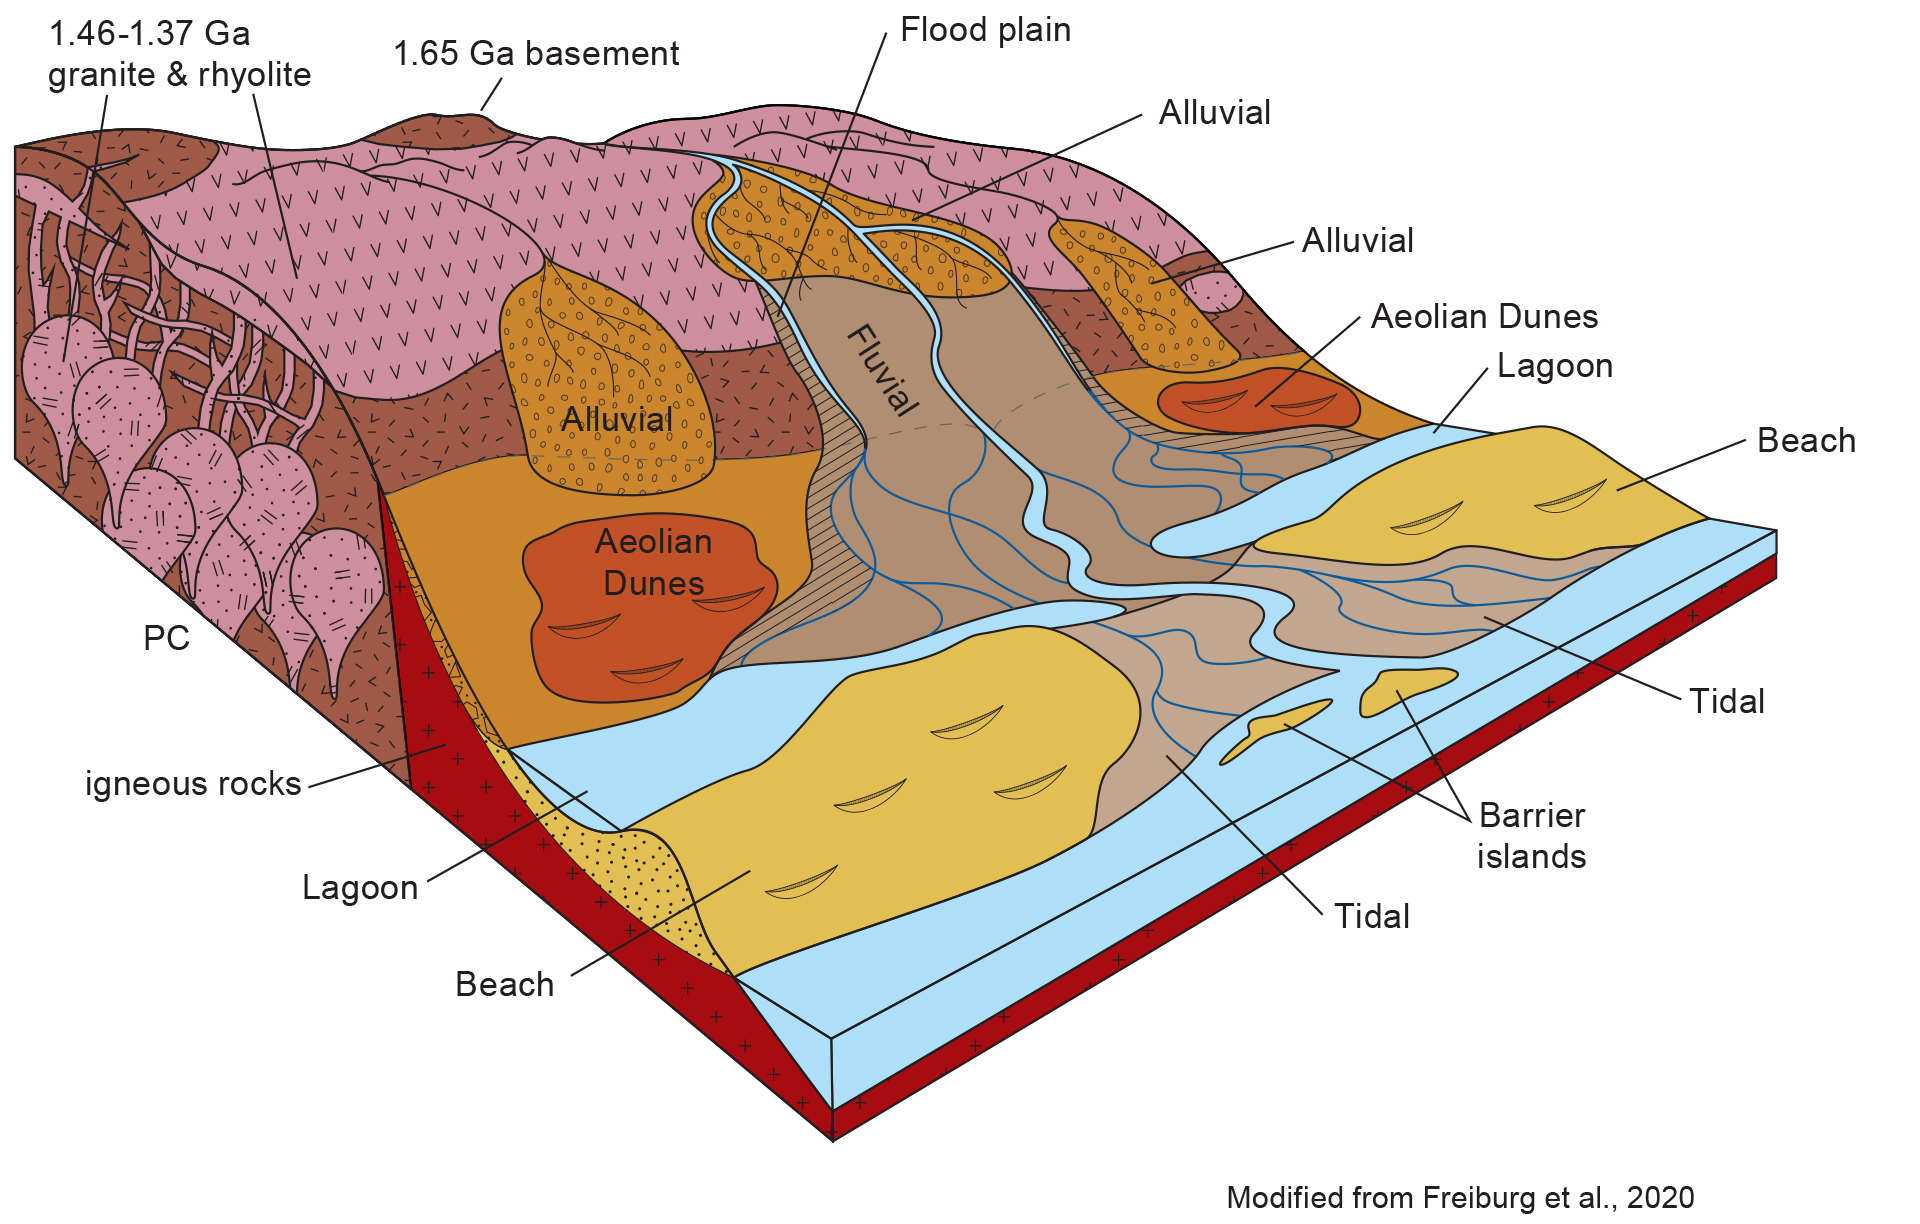 A generalized depositional model of the Mt. Simon Sandstone deposited on a complex Precambrian basement. All depositional environments observed at the IBDP are represented. (Freiburg, Jared T., Mark E. Holland, David H. Malone, and Shawn J. Malone, 2020, Detrital Zircon Geochronology of Basal Cambrian Strata in the Deep Illinois Basin, USA: Evidence for the Paleoproterozoic-Cambrian Tectonic and Sedimentary Evolution of Central Laurentia, The Journal of Geology